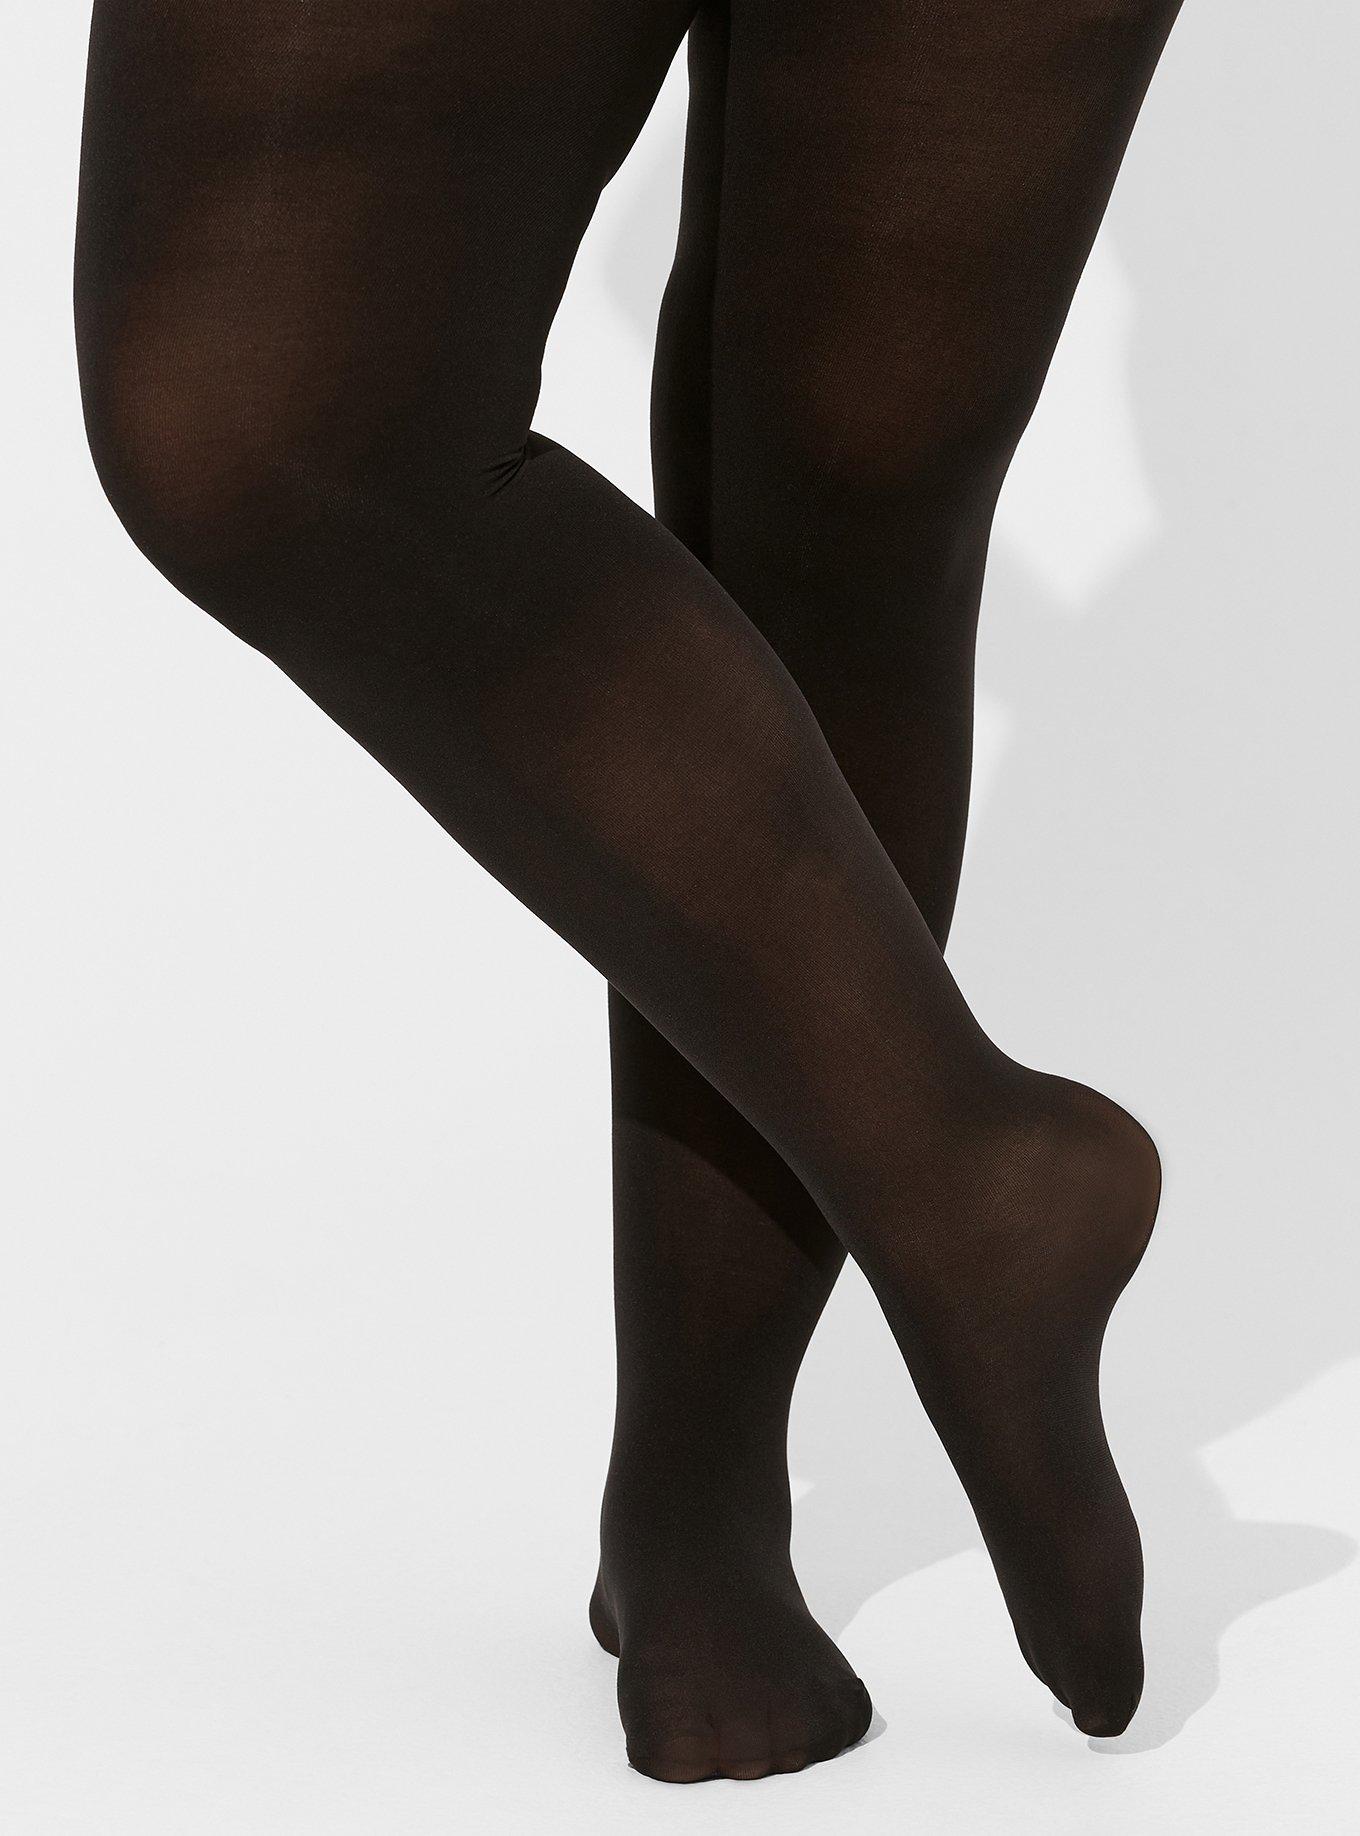 5 x Wicked 200D Opaque Tights - Black